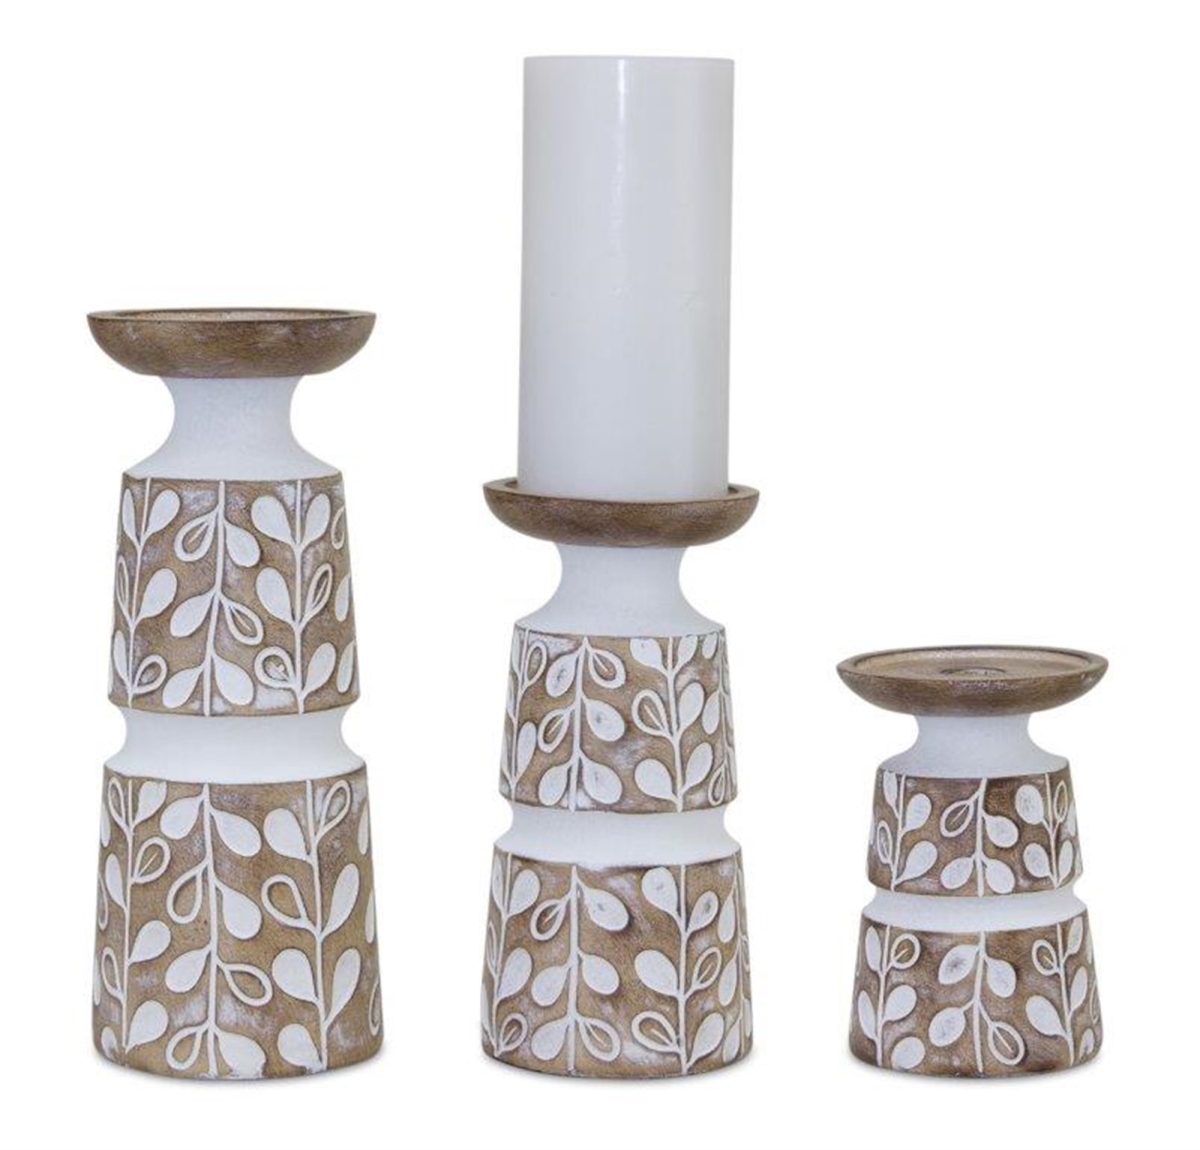 UPC 746427828277 product image for 82827 5.5 x 8 x 10.25 in. Resin Candle Holder, Brown & White - Set of 3 | upcitemdb.com